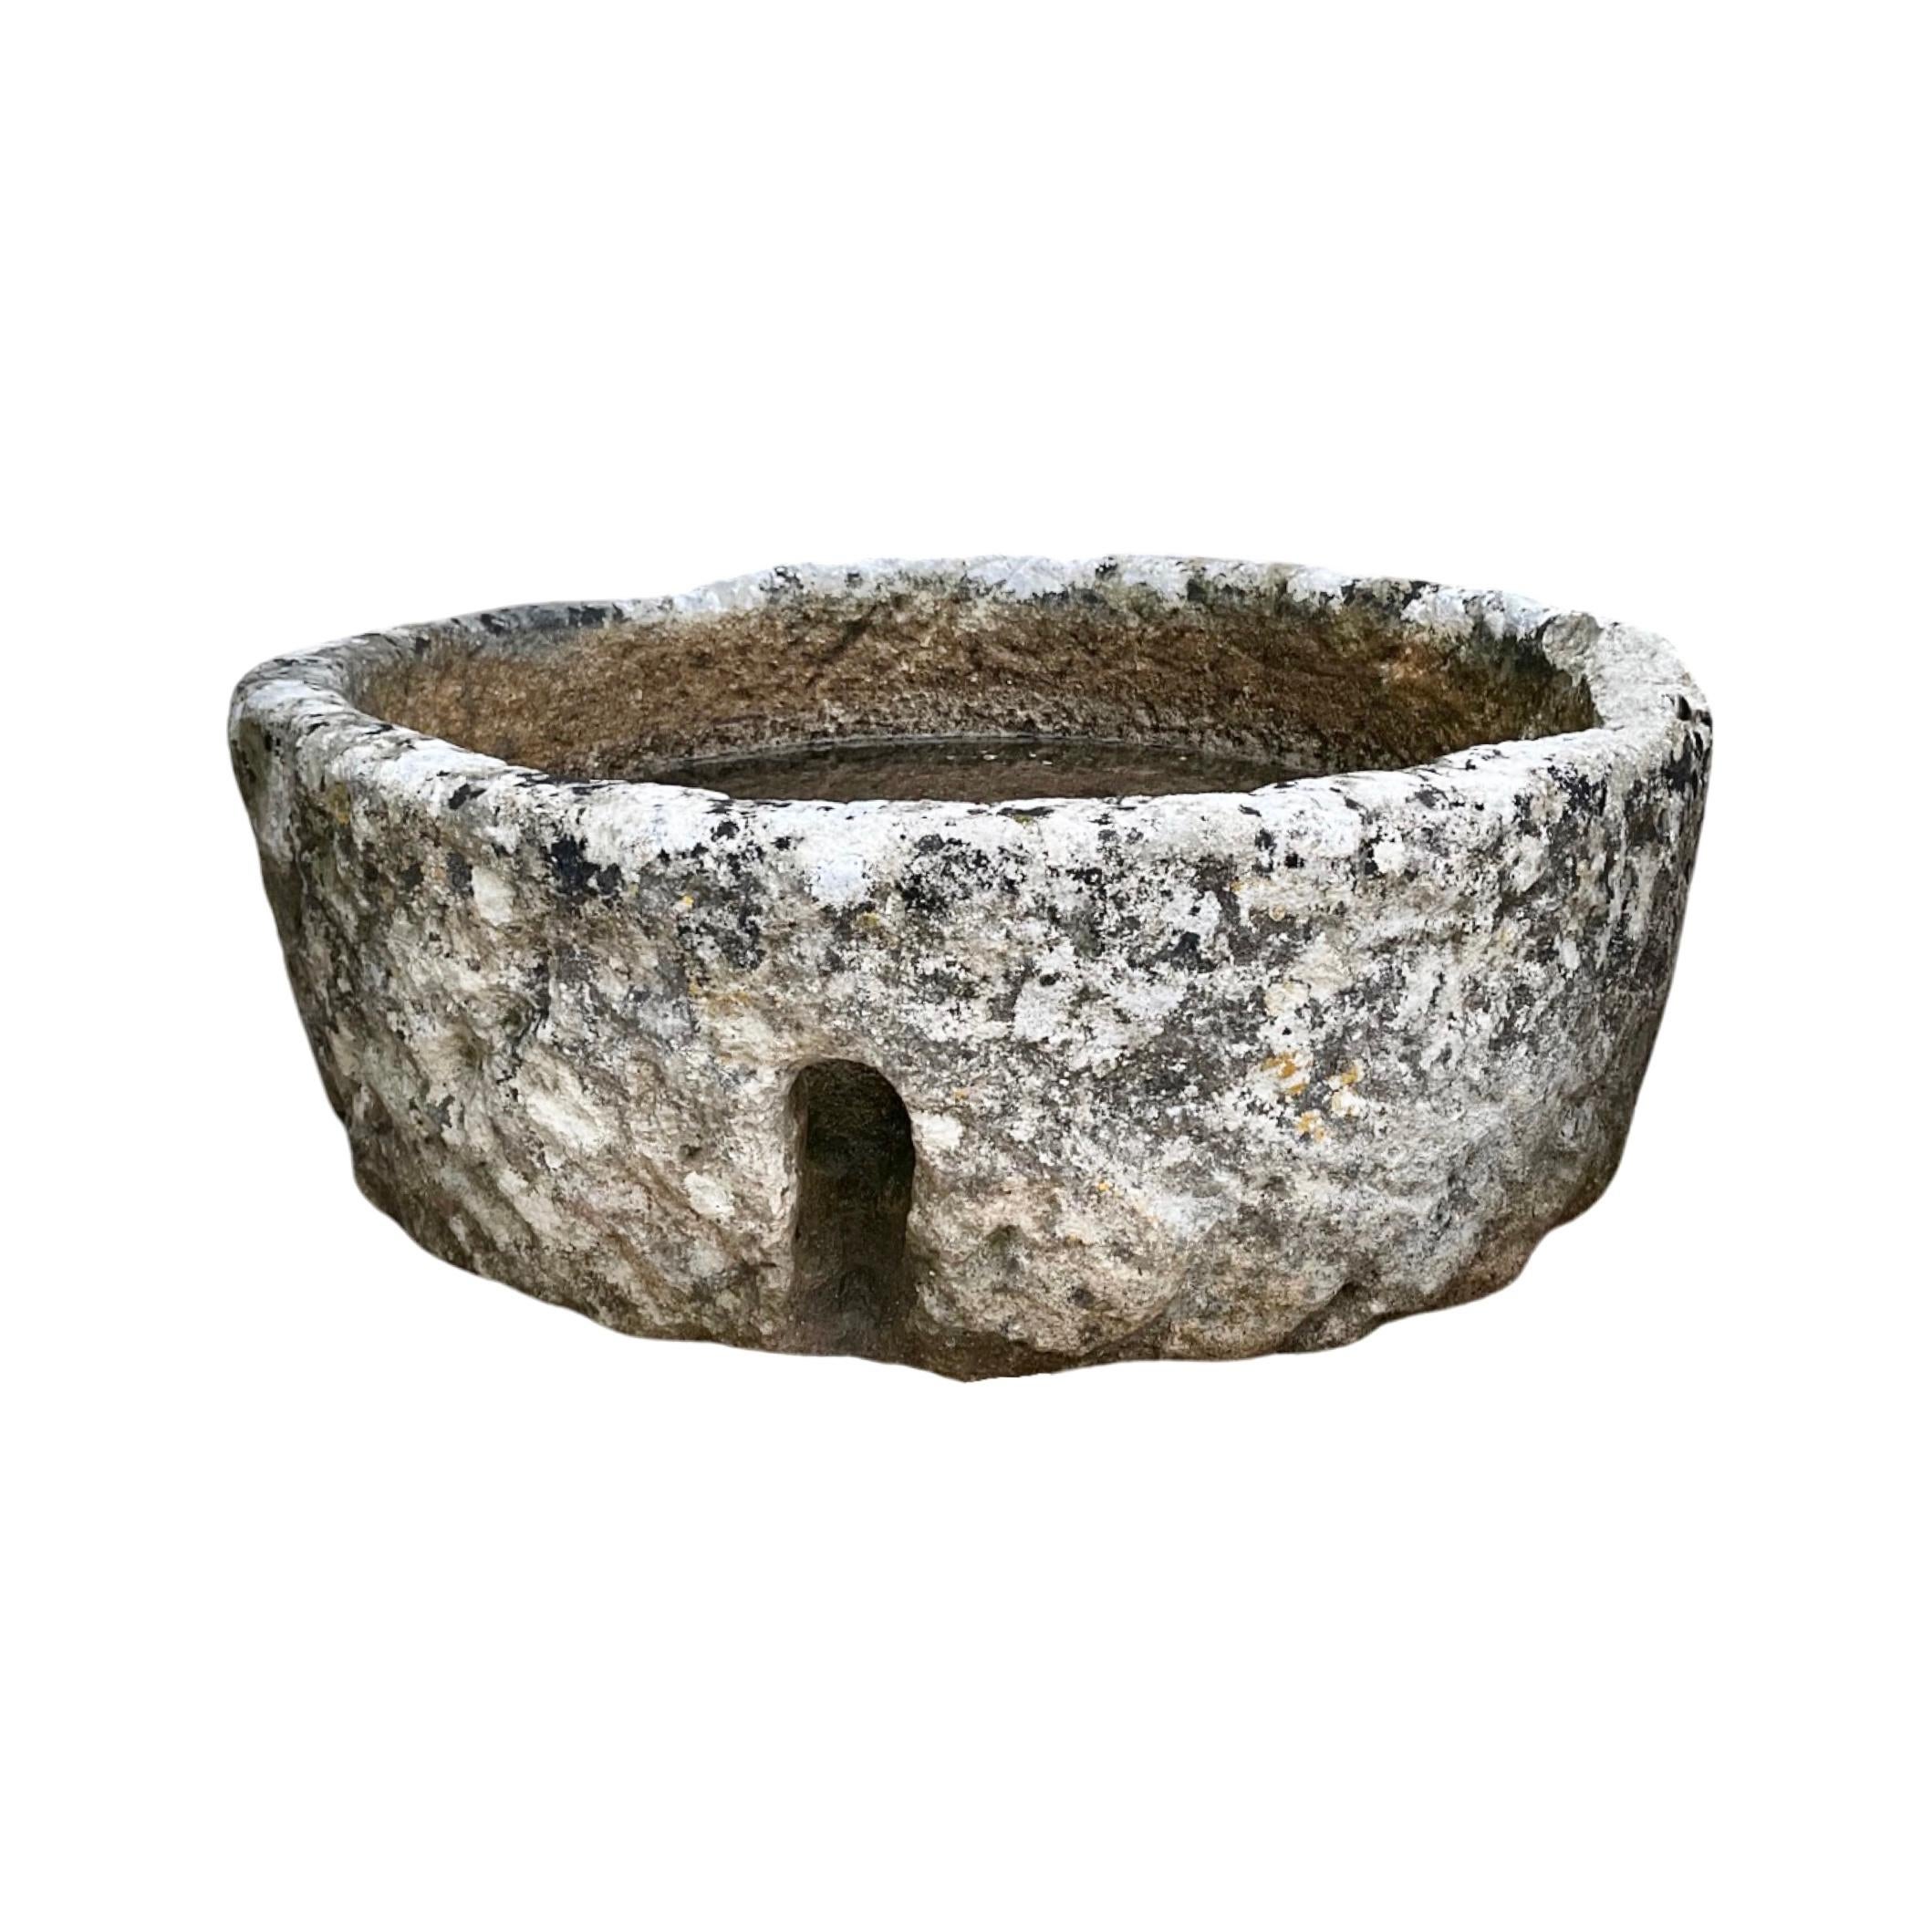 The French Limestone Circular Trough from the 18th century adds a touch of elegance to any garden. Crafted from premium limestone, it features 2 drainage holes for efficient water drainage. Perfect for any outdoor space and adds a touch of